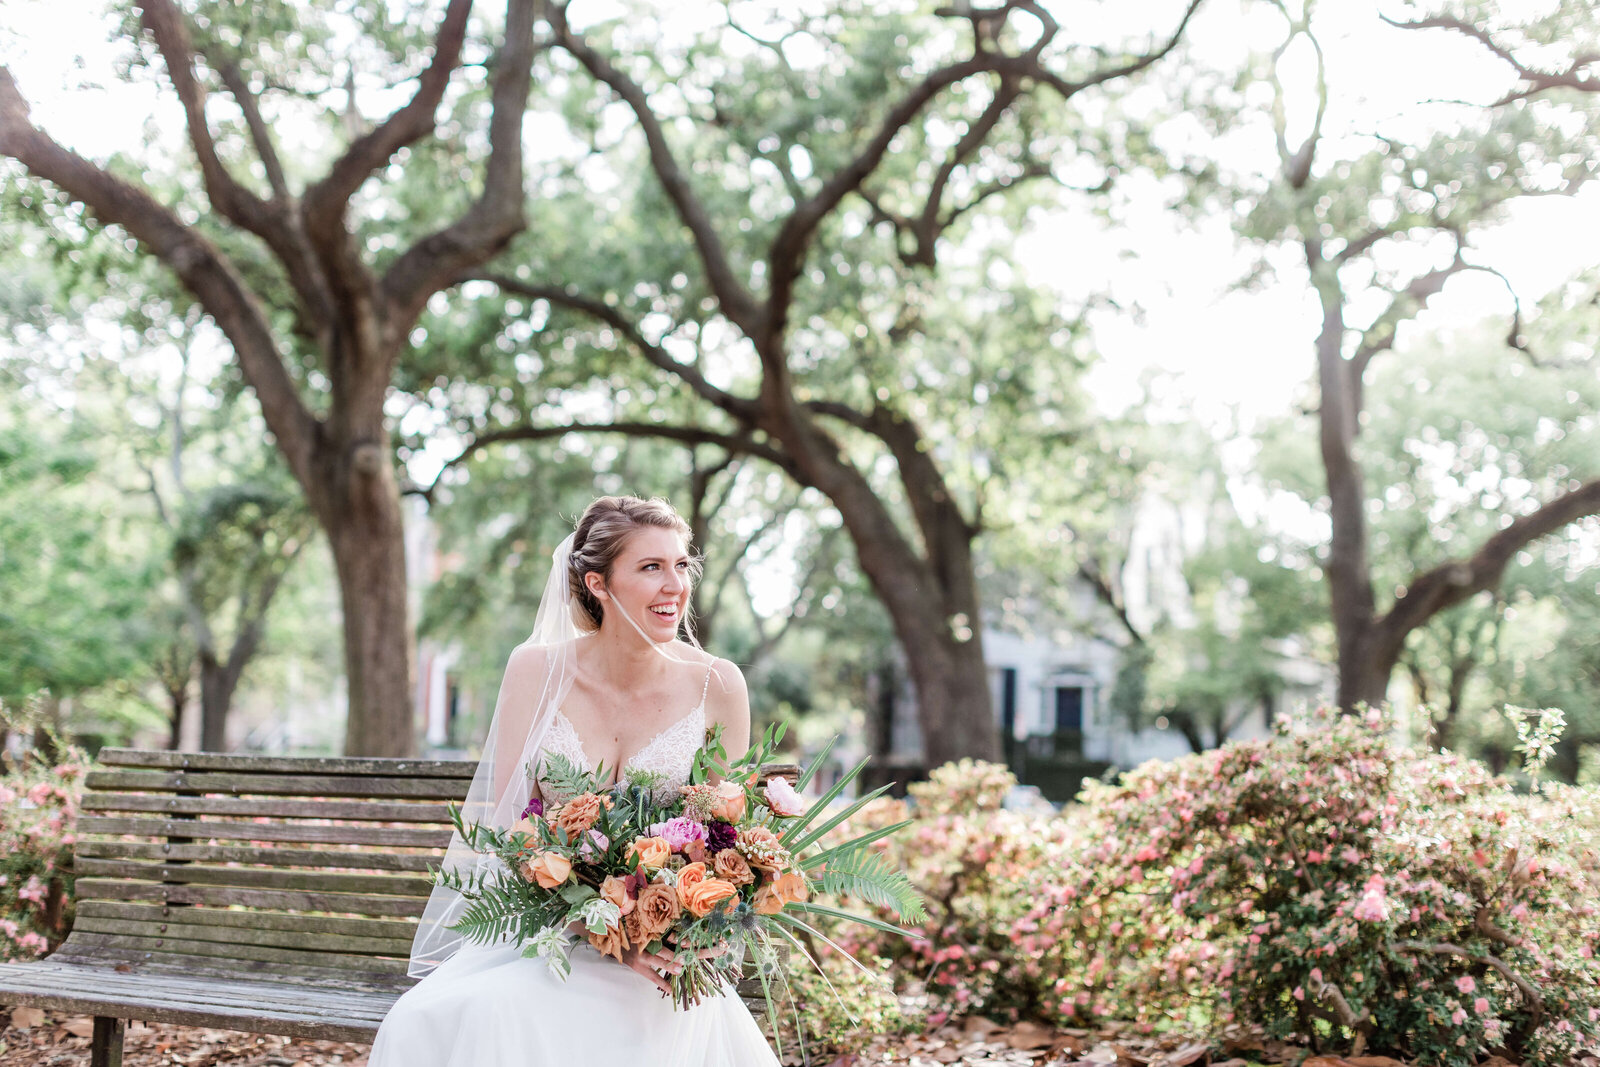 Flowers by Ivory and Beau - Savannah Elopement Package